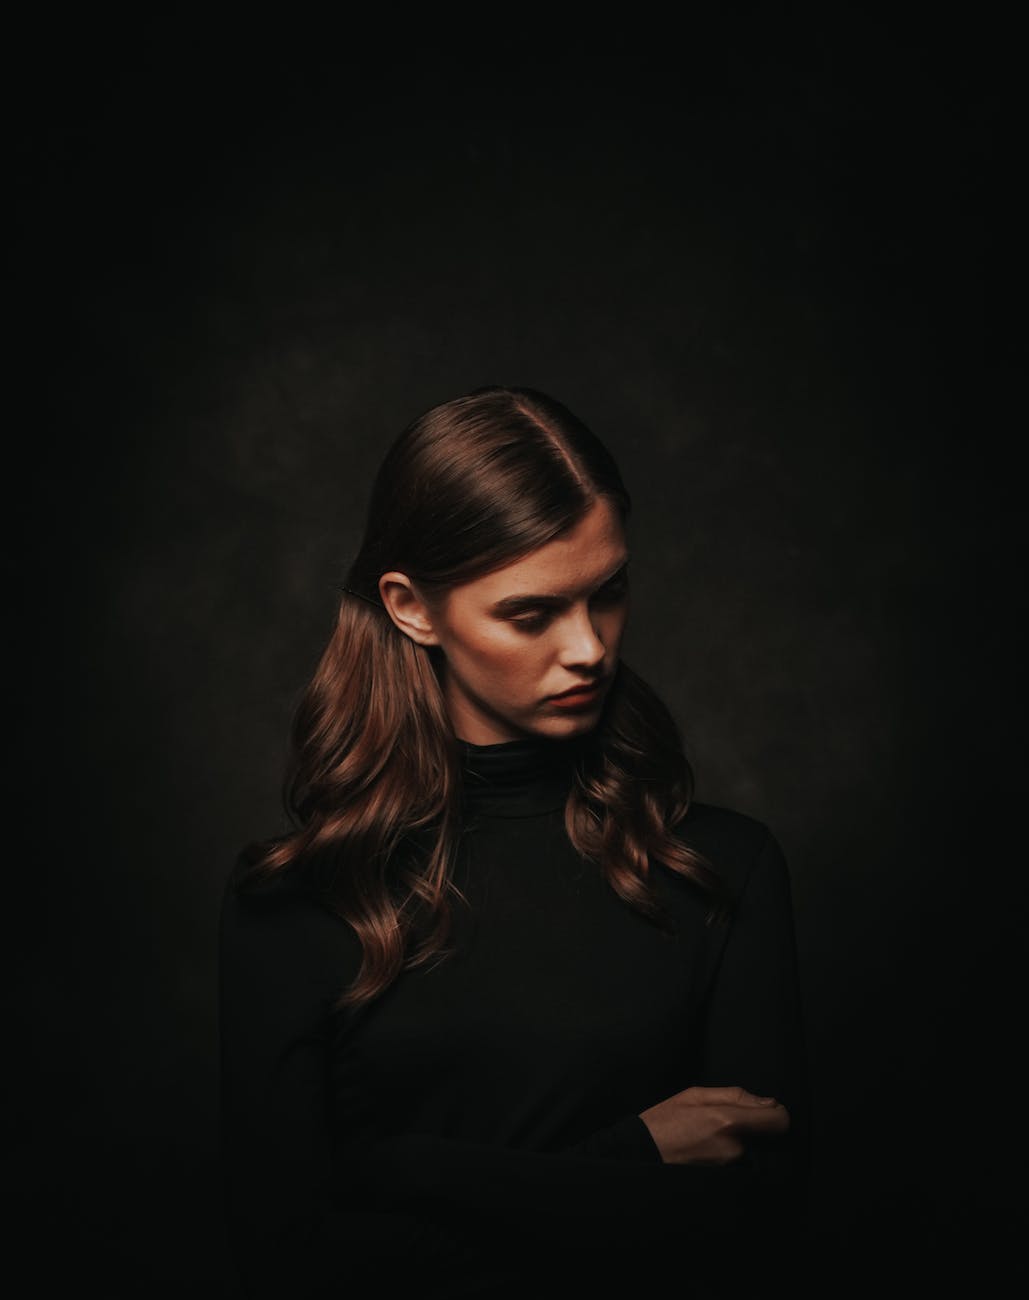 photo of woman in black turtleneck sweater posing in front of black background while looking away